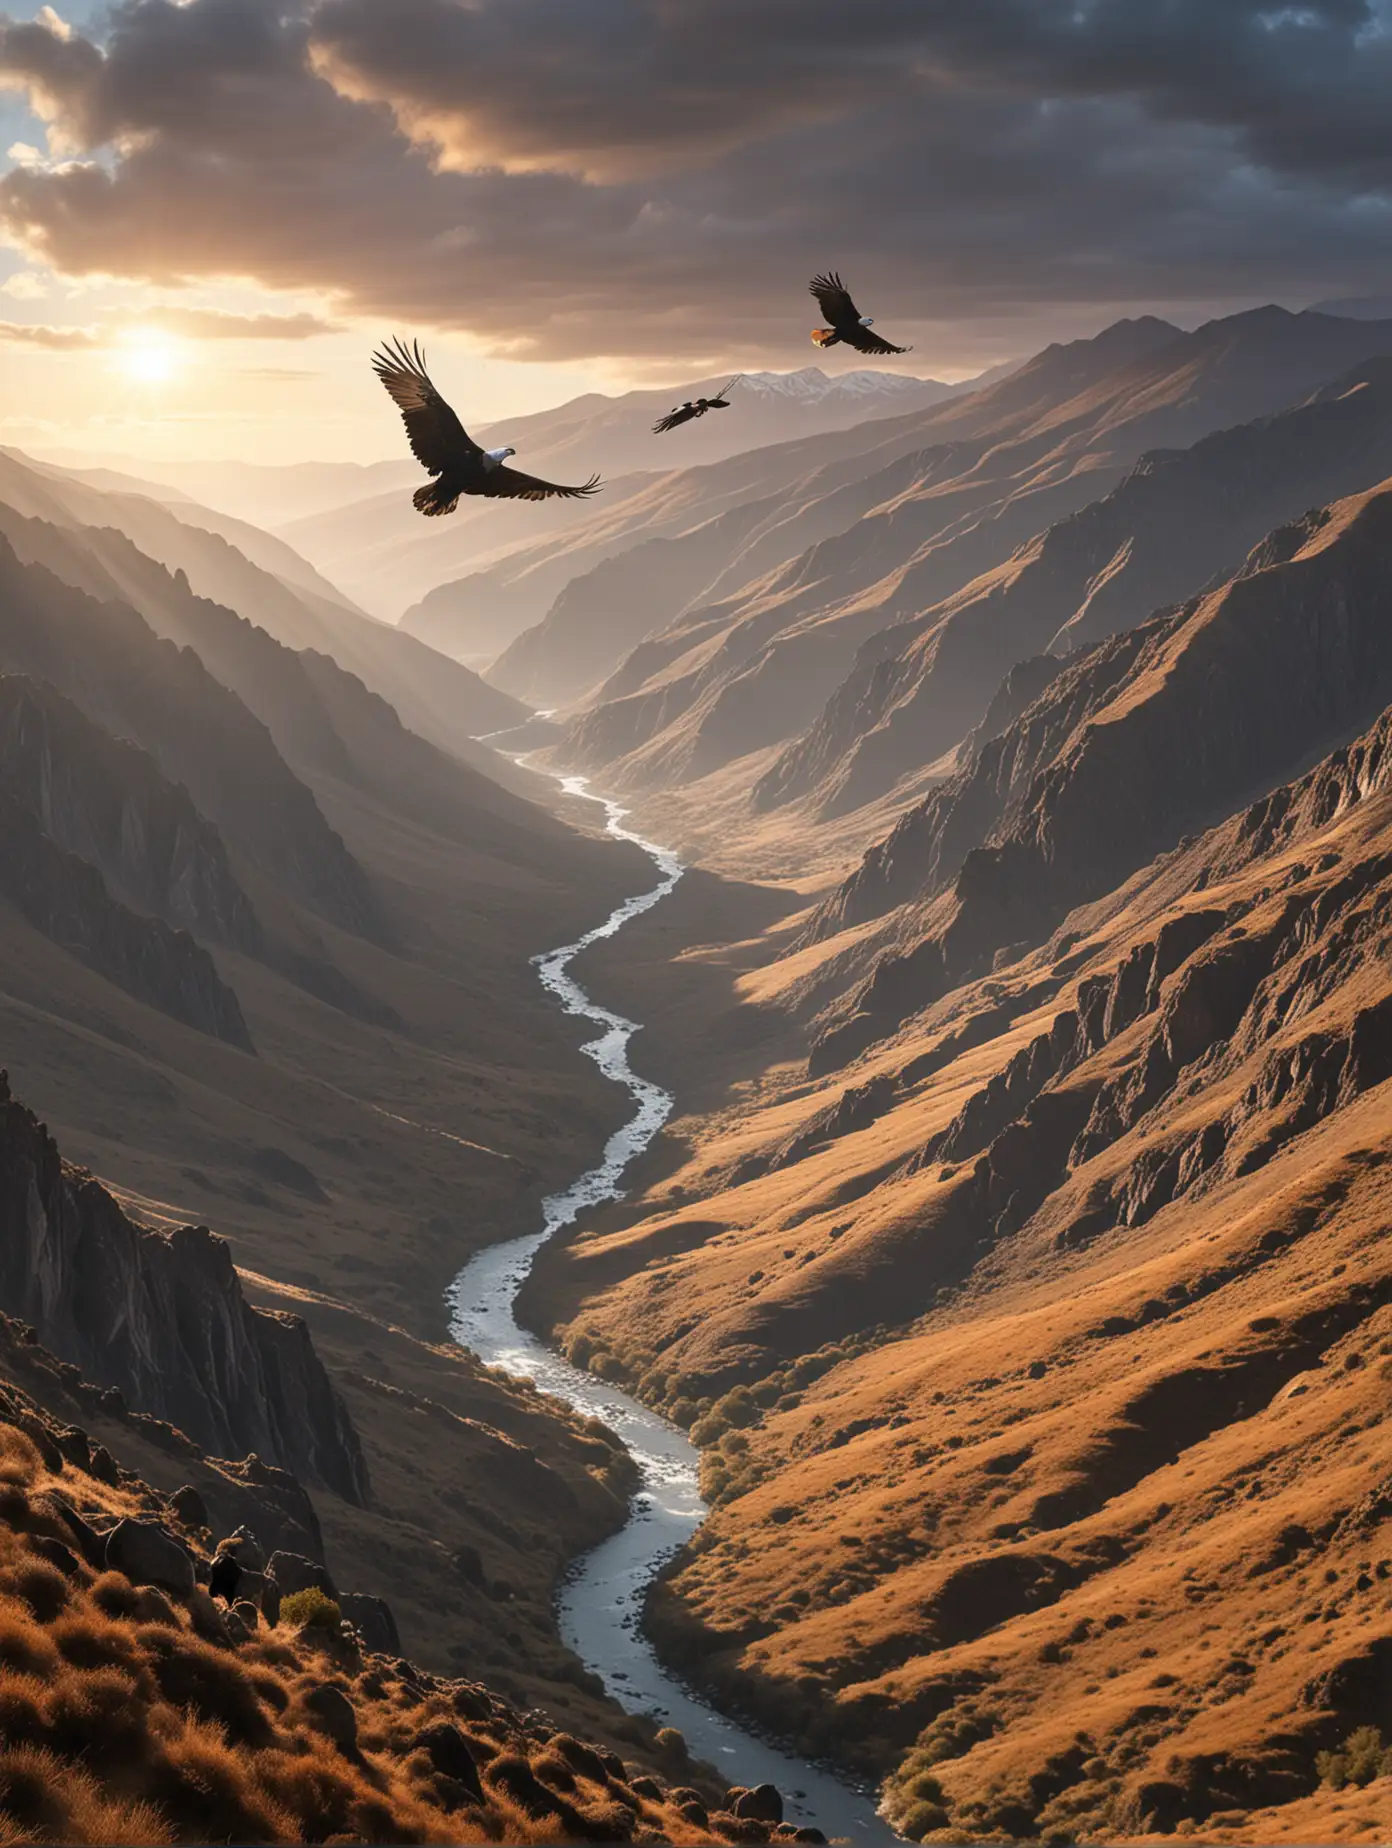 Generate an image of 4 condors flying over a valley in the Andes, there is a tree lined river in the valley and in the paramo ecosystem, there are 2 hikers standing on the hill side looking up at the condors as they circle the valley, it is sunrise and the image is realistic.